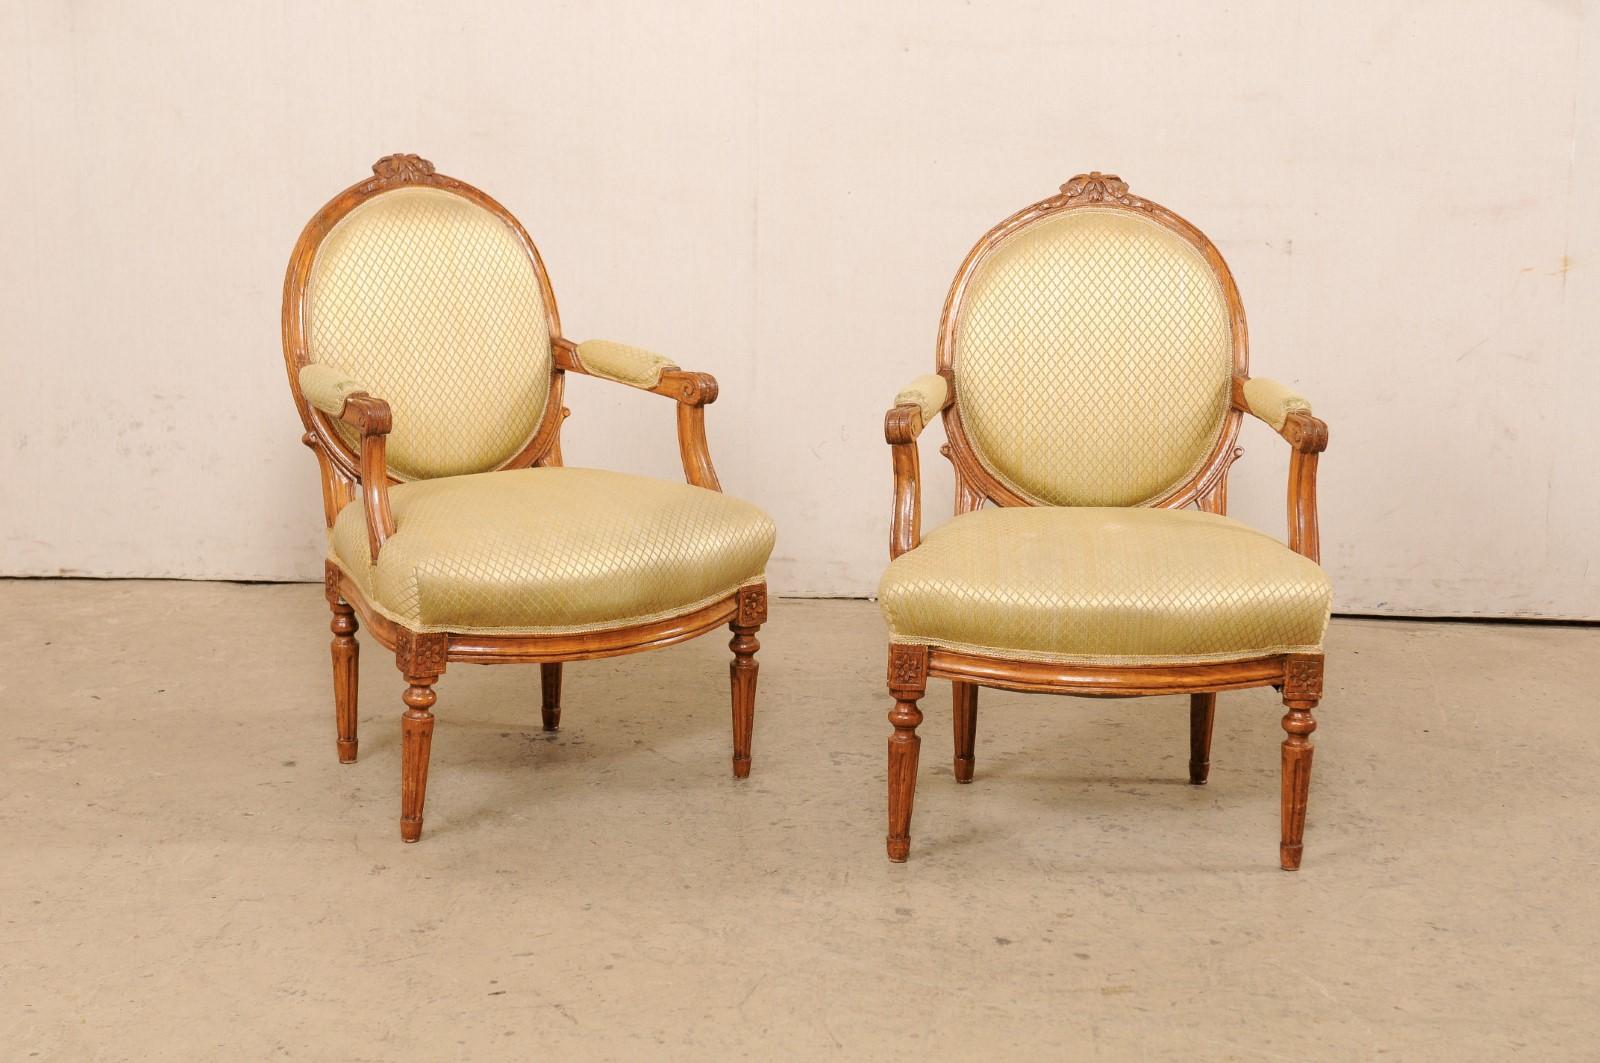 A French pair of Louis XVI style carved wood and upholstered fauteuil chairs from the mid 20th century. This mid-century pair of armchairs from France each feature oval-shaped upholstered backs within a wood frame accentuated with spiraled ribbon